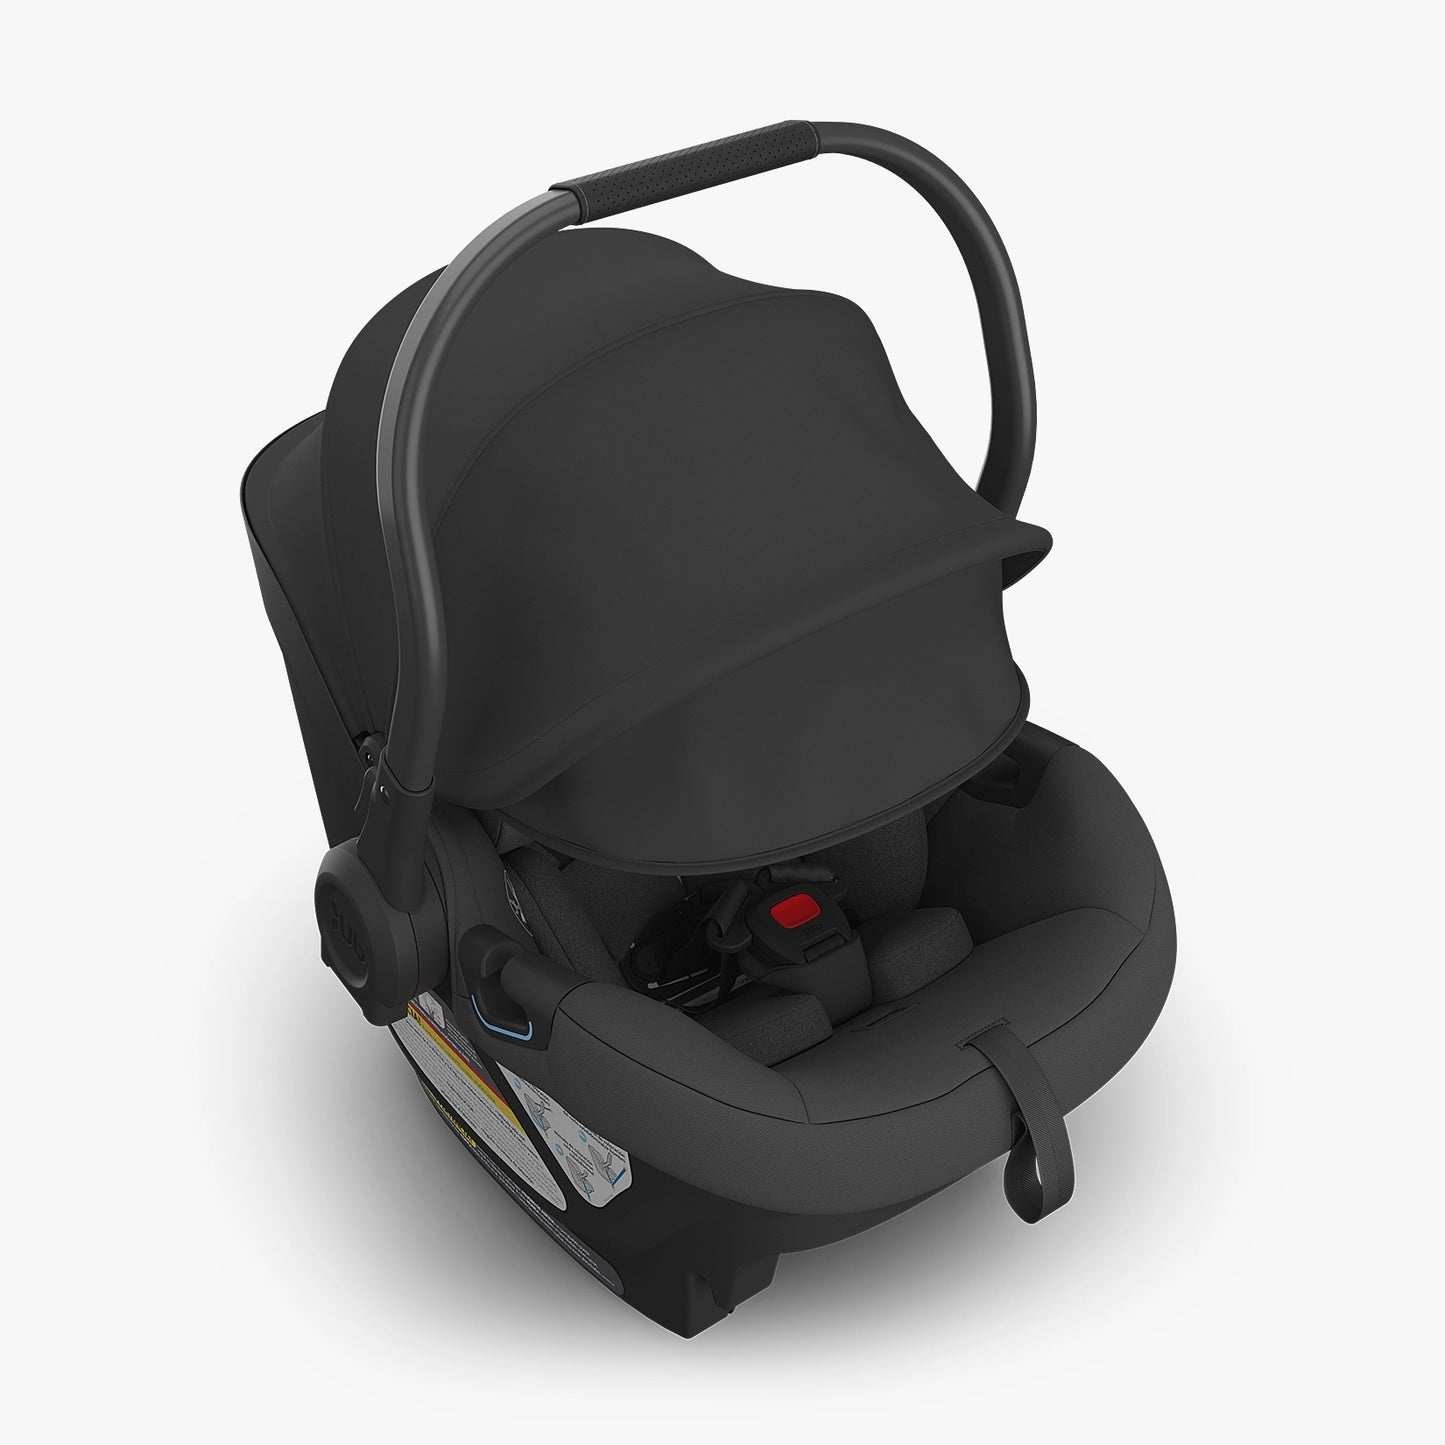 ARIA Infant Car Seat - JAKE (BACKORDERED UNTIL JUNE)  - DROPSHIP ITEM - PLEASE ALLOW ONE WEEK FOR PROCESSING